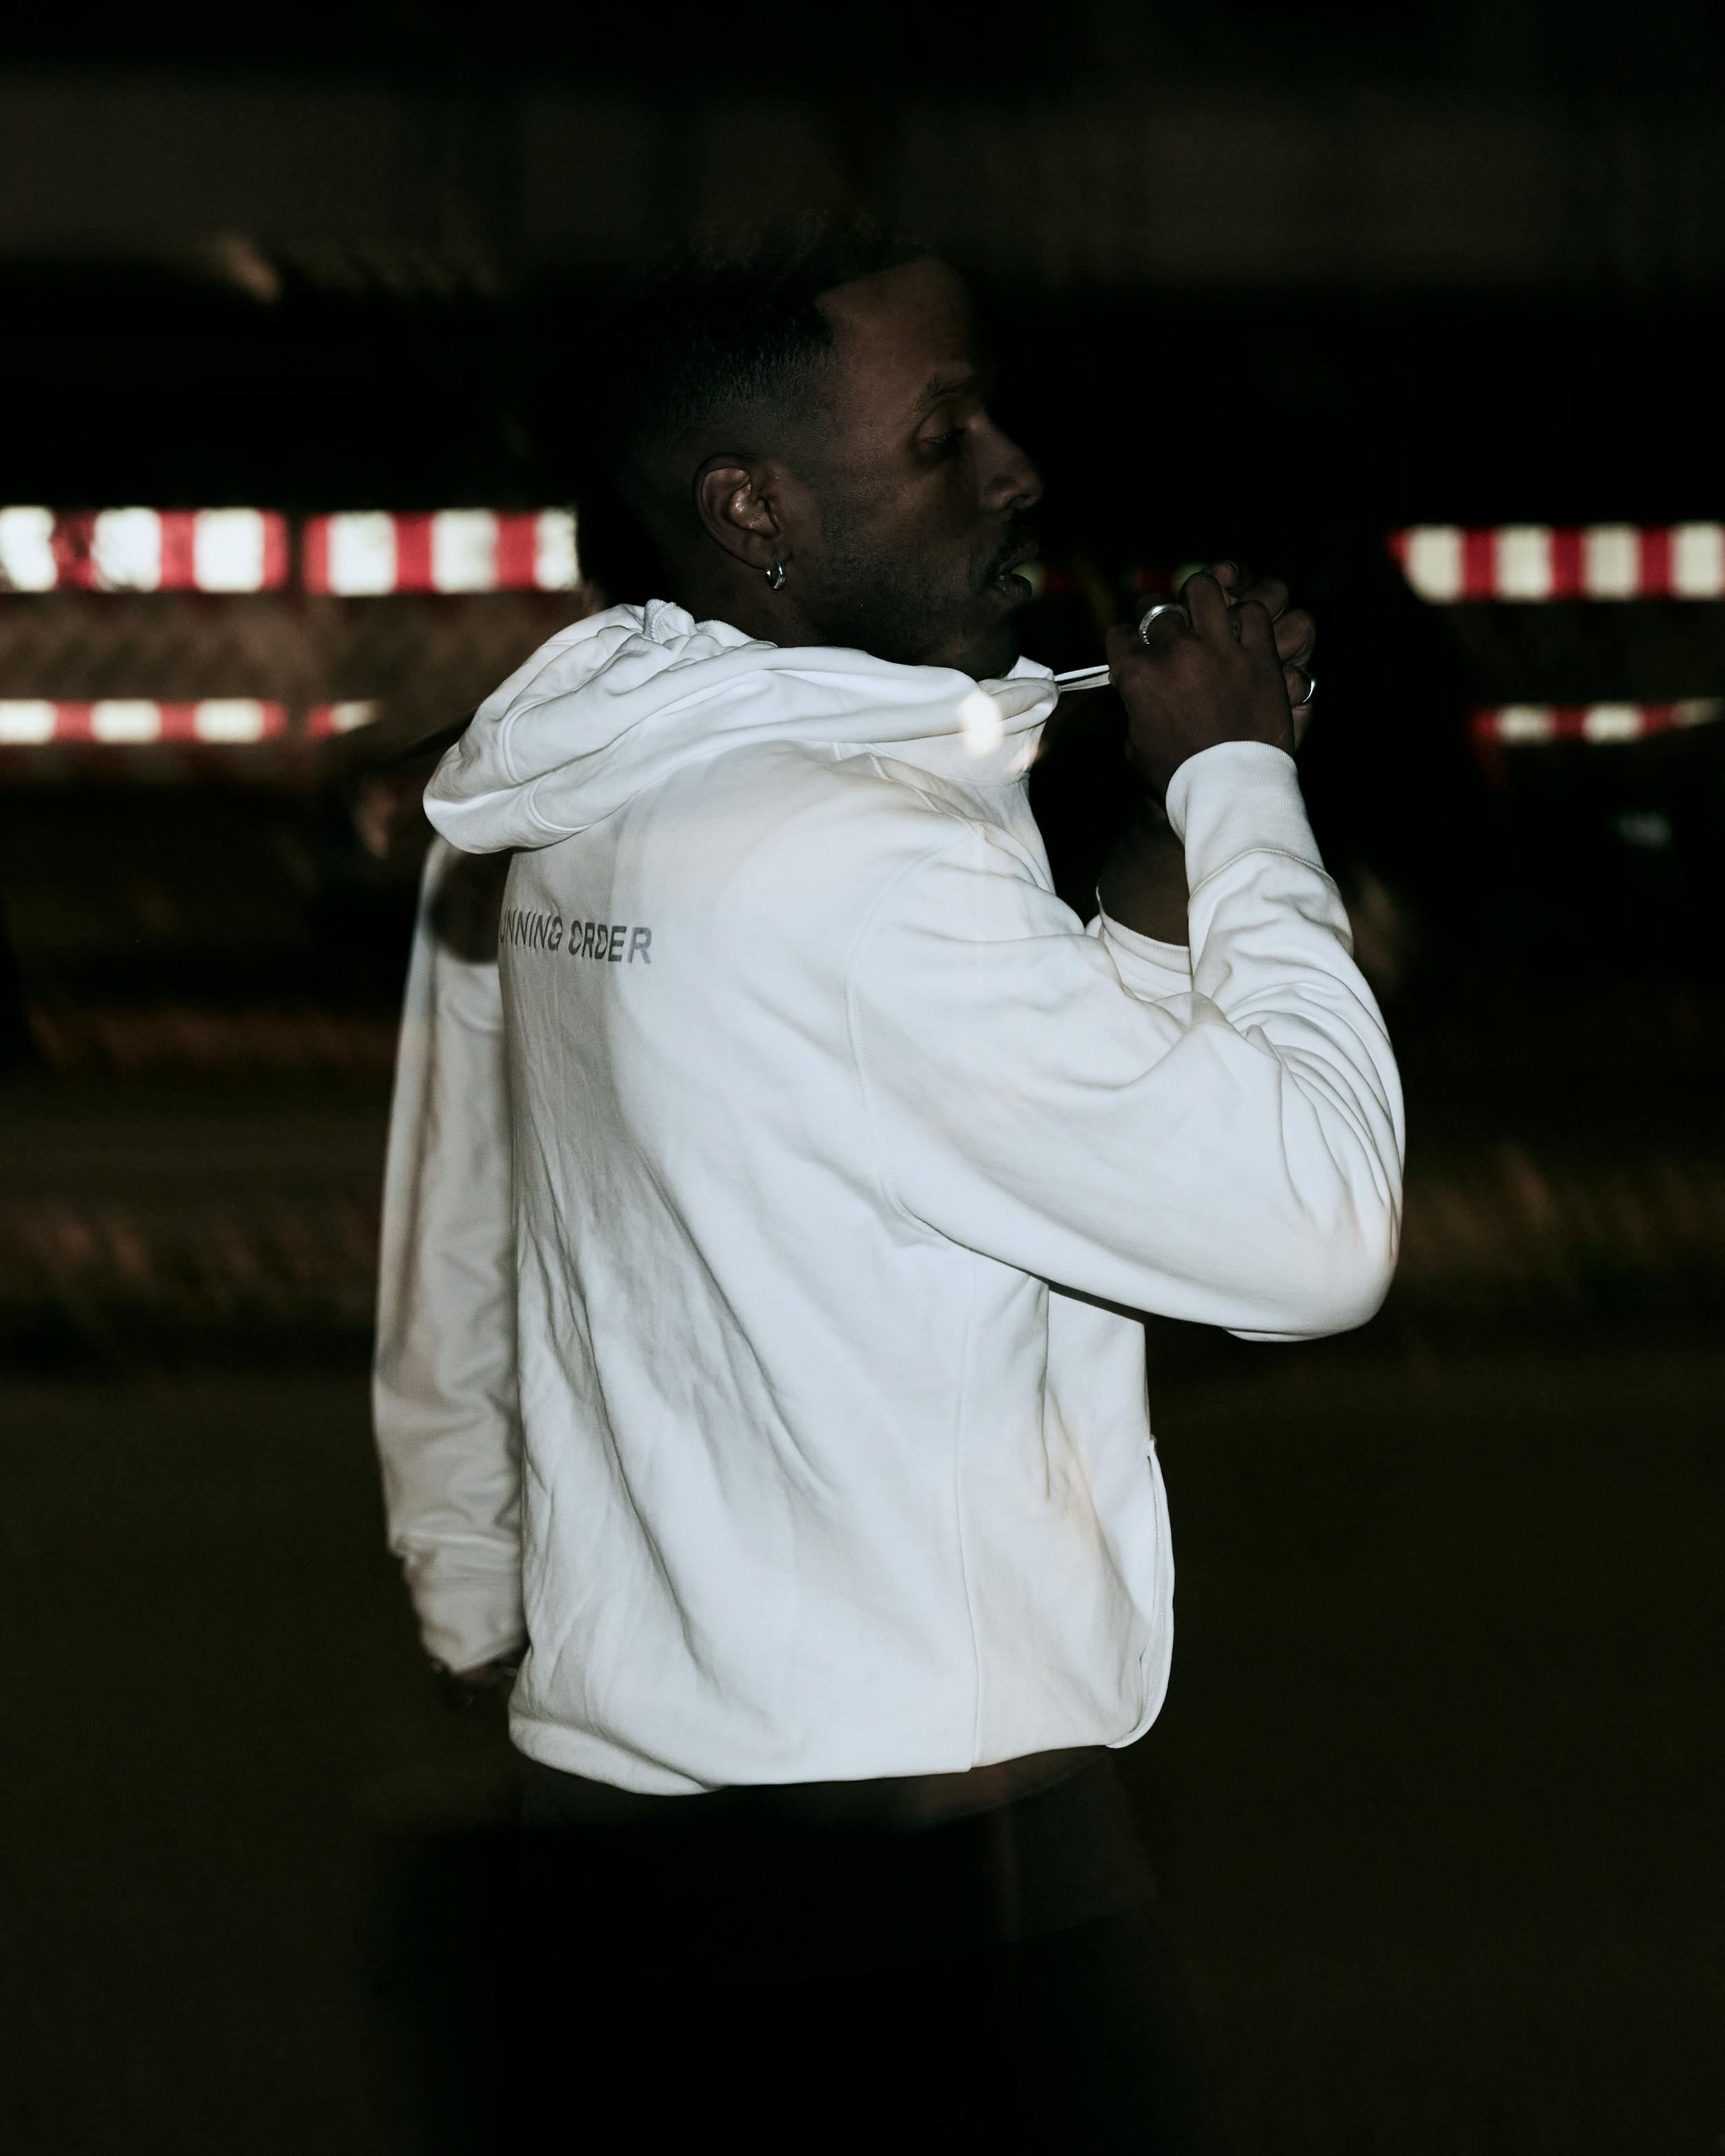 BERLIN NIGHT RUN - IDRIYS HOODIE IN WHITE -COLLECTION 02 - Photographed by Jack Hare